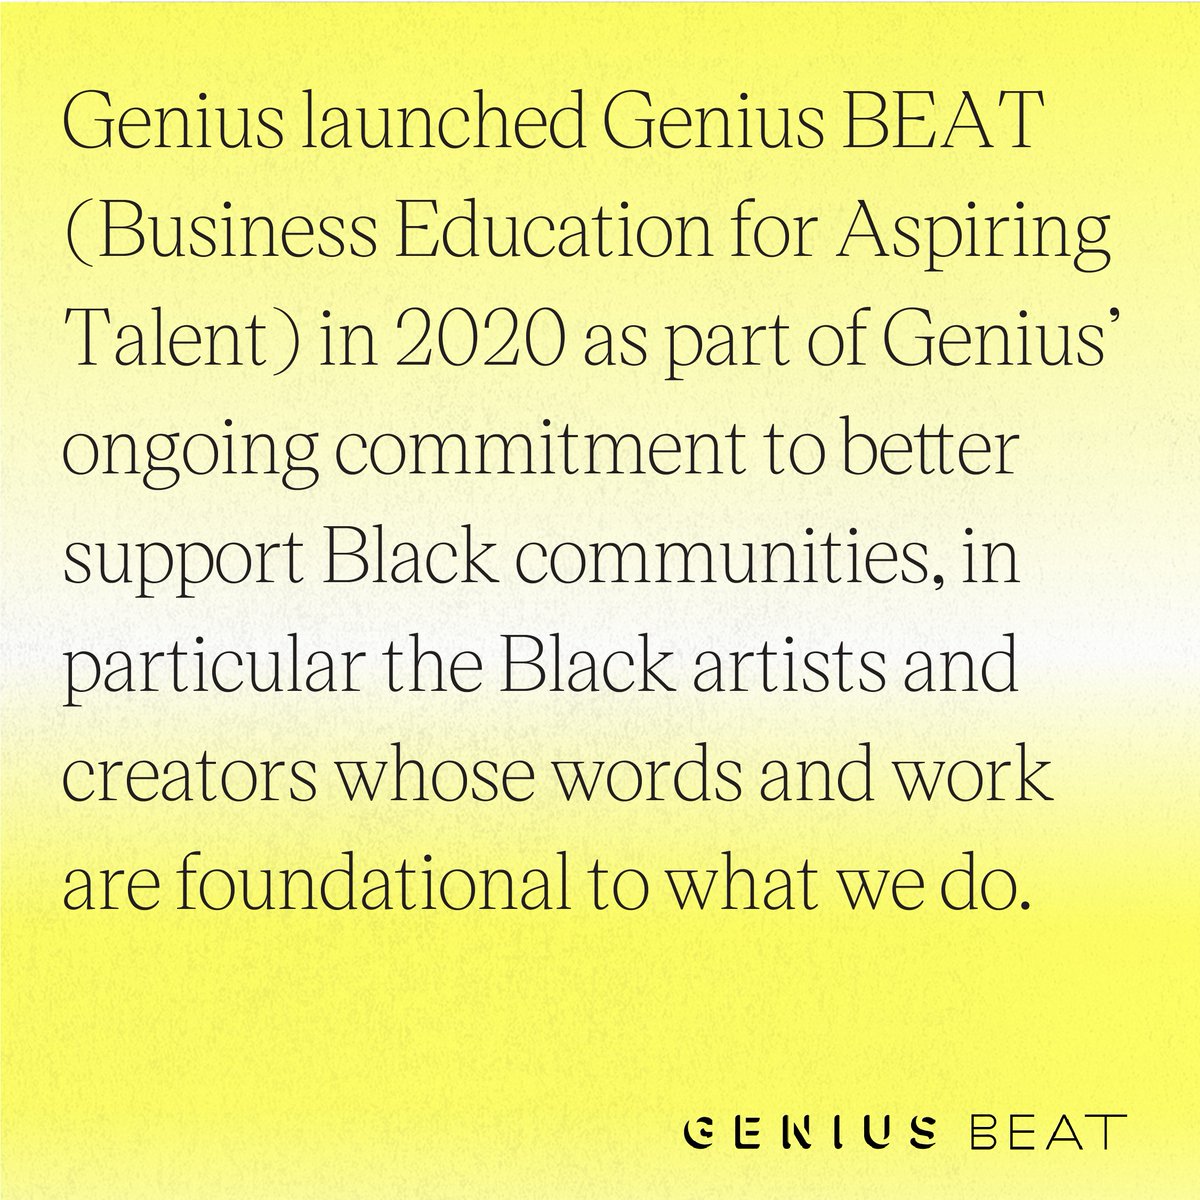 we're covering the basics around music labels and digital distributors in our next #GeniusBEAT seminar 🎤 pull up on april 26 if you wanna learn more about the music industry

RSVP: so.genius.com/H3rcivs